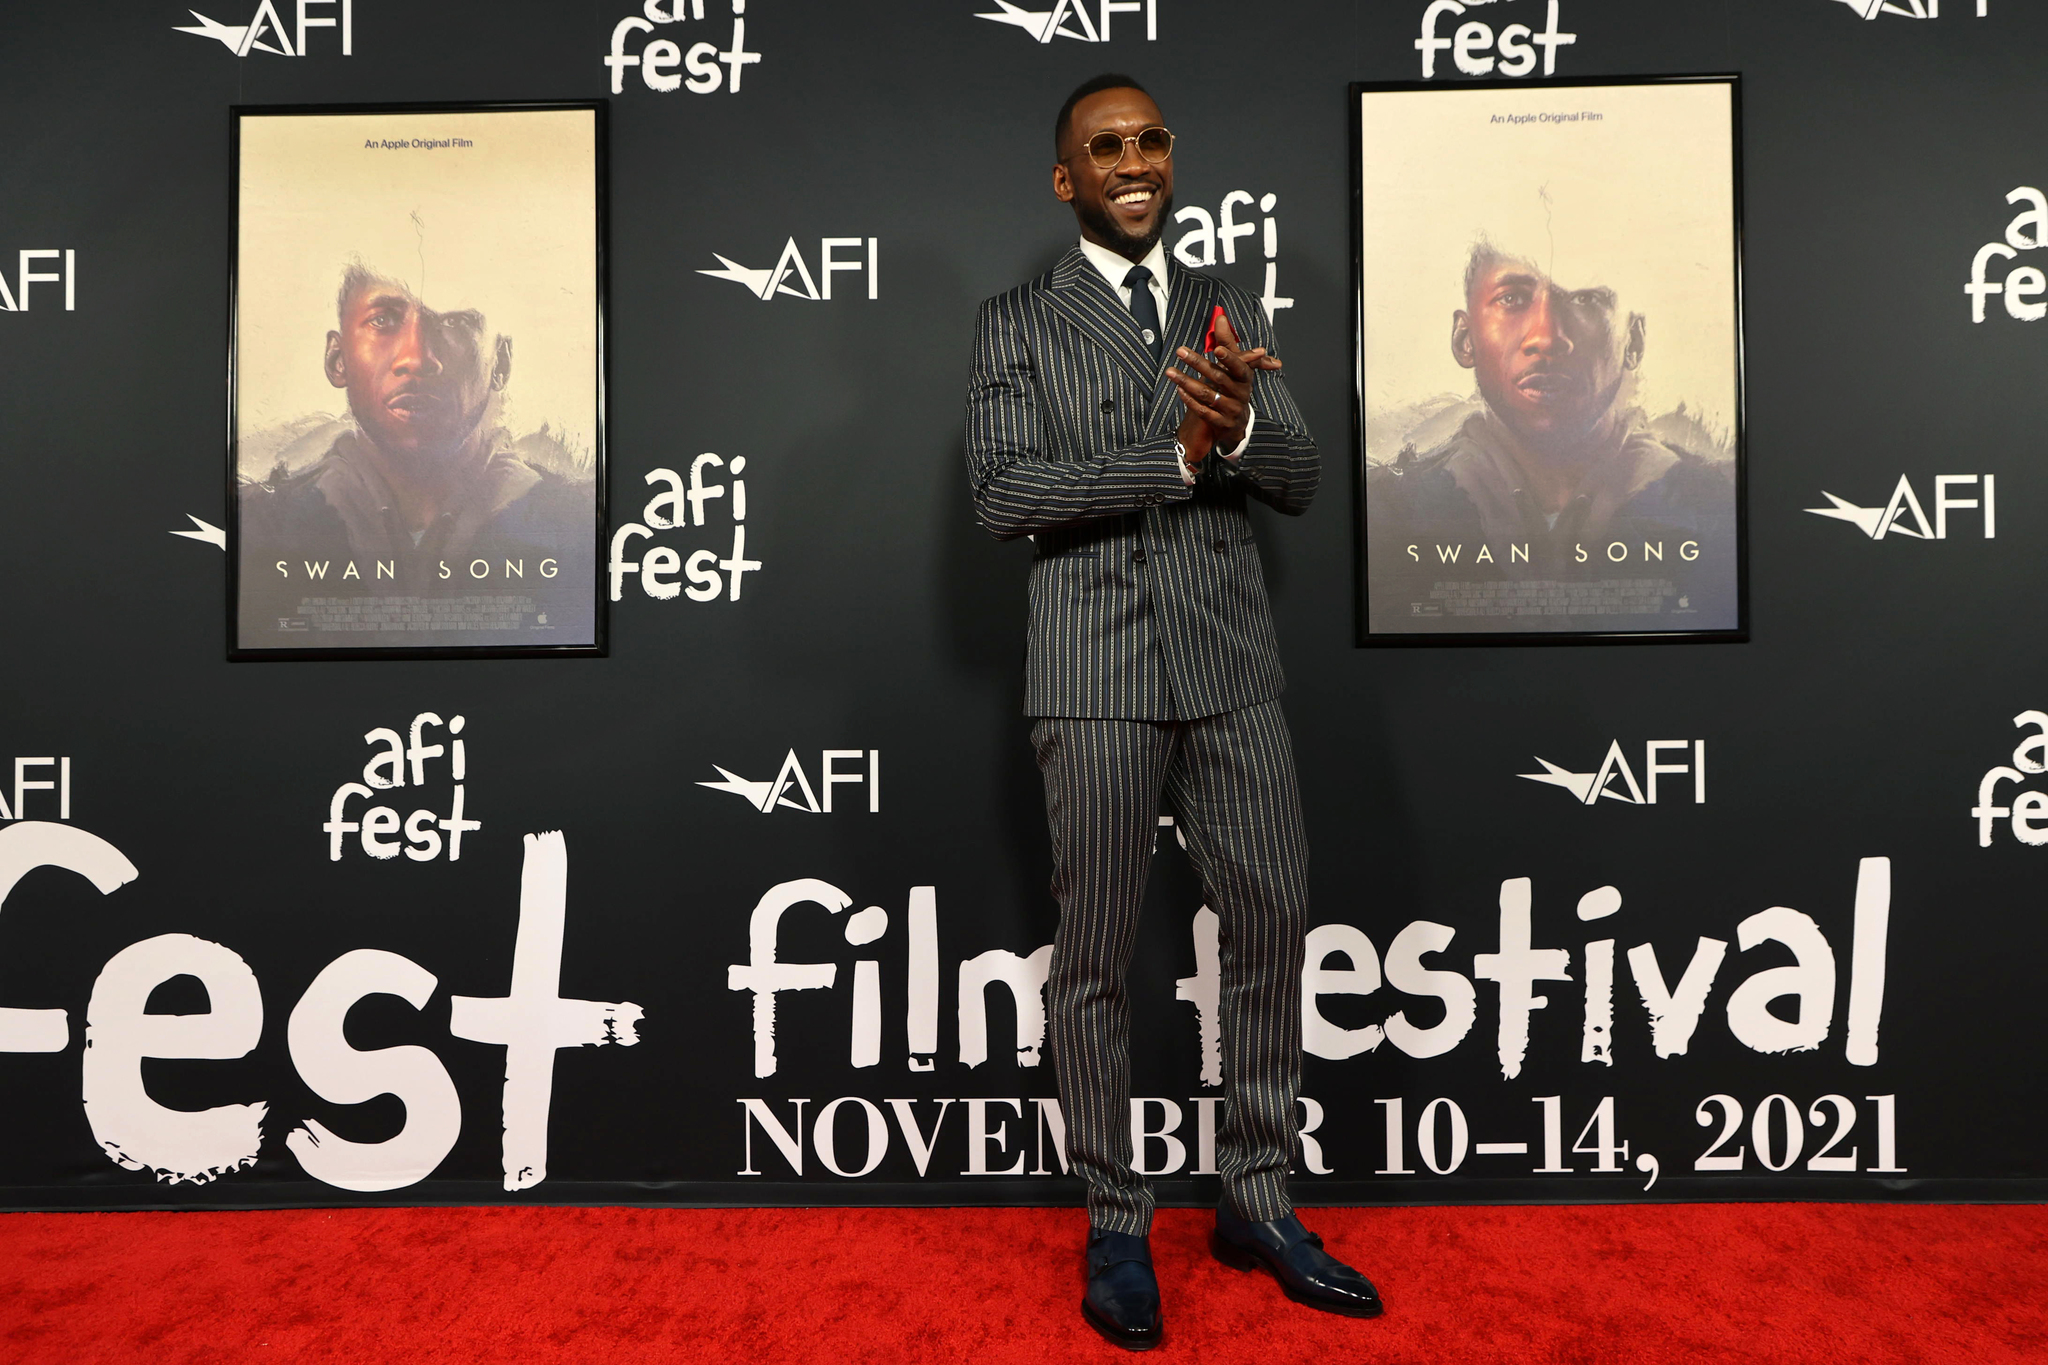 LOS ANGELES, CA - NOVEMBER 12: Mahershala Ali attends the AFI Fest World Premiere of Apple Original Films' "Swan Song" at TCL Chinese Theatre. "Swan Song" will premiere in theaters and globally on App